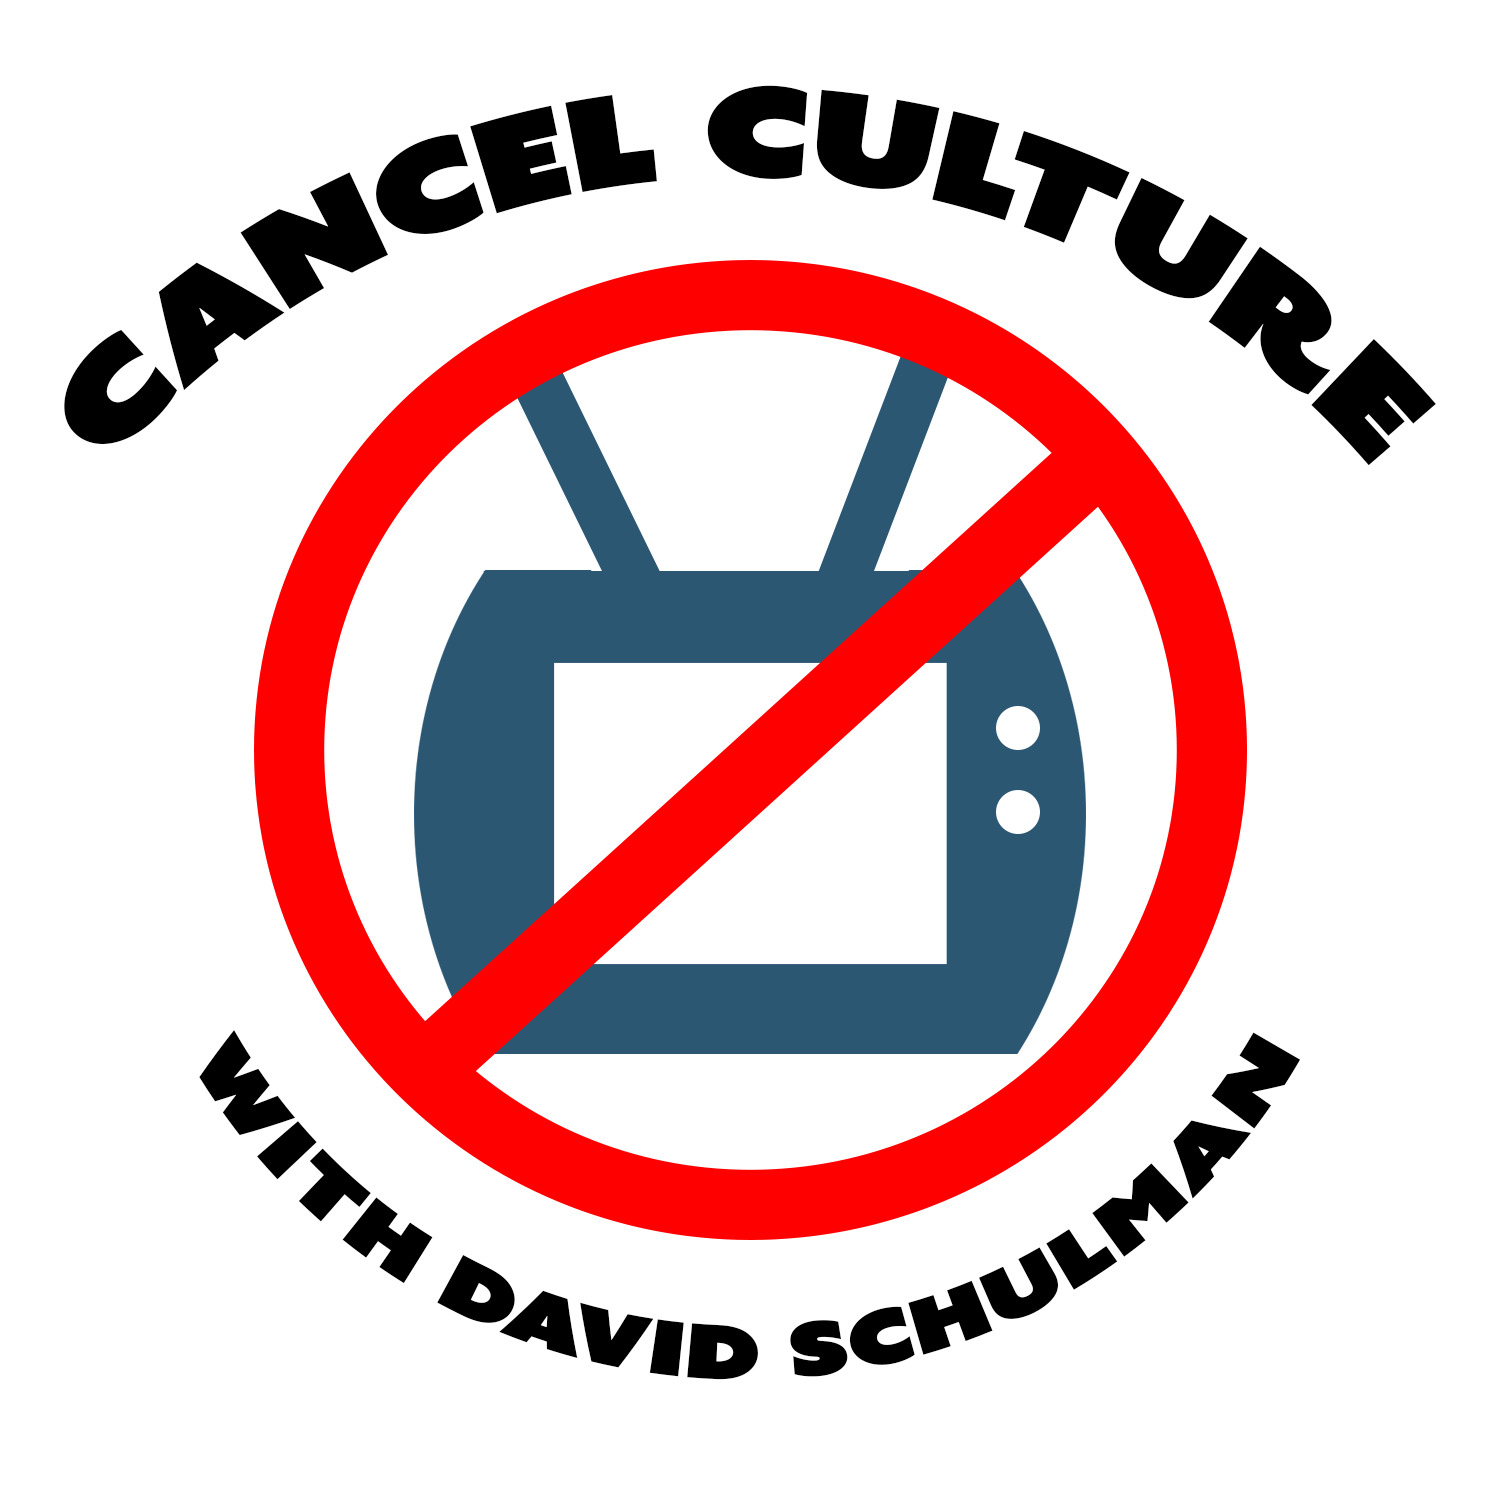 Cancel Culture Episode 4: Freaks and Geeks